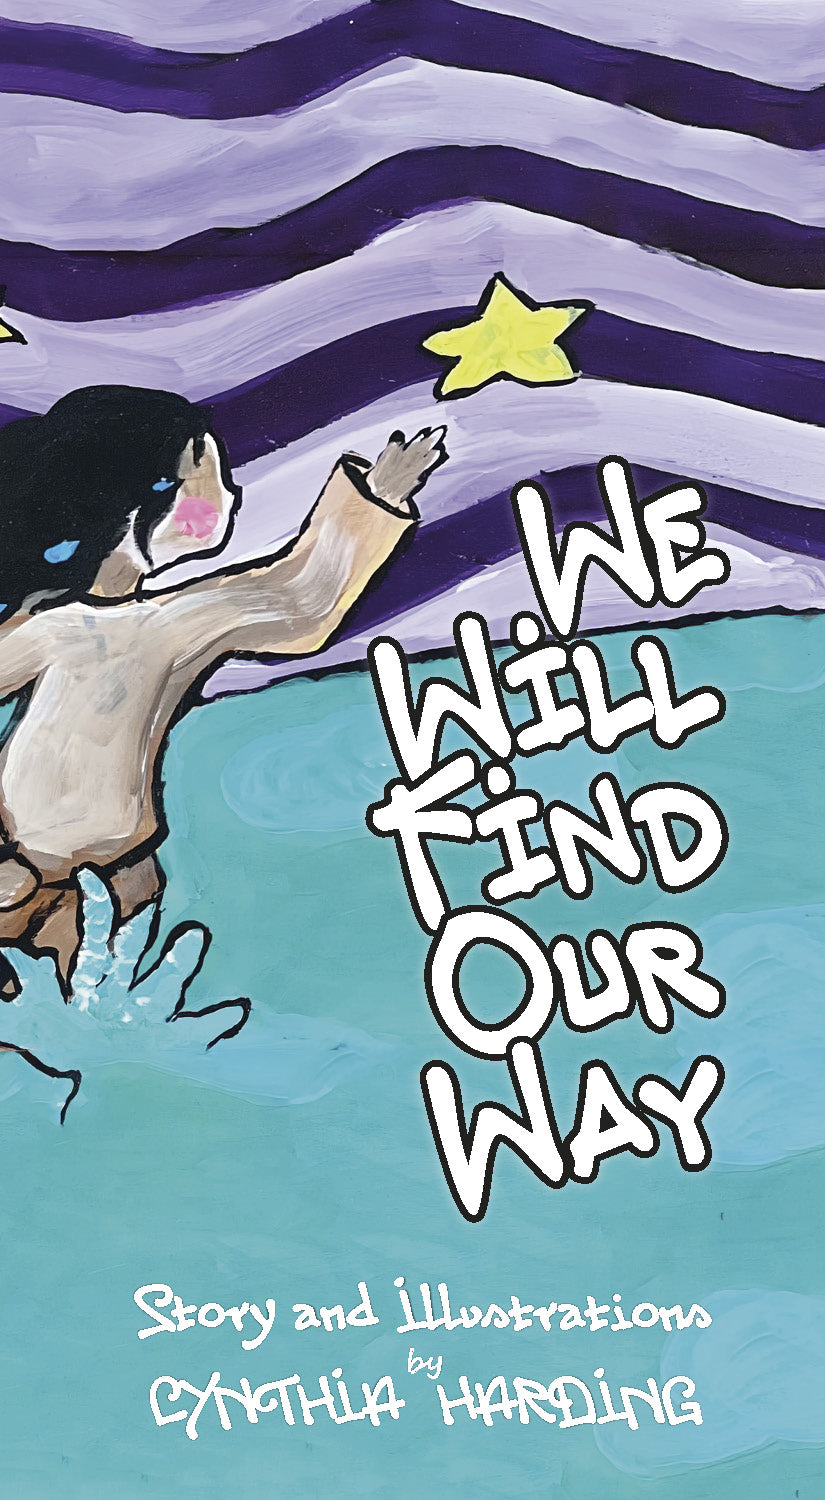 We Will Find Our Way by Cynthia Harding